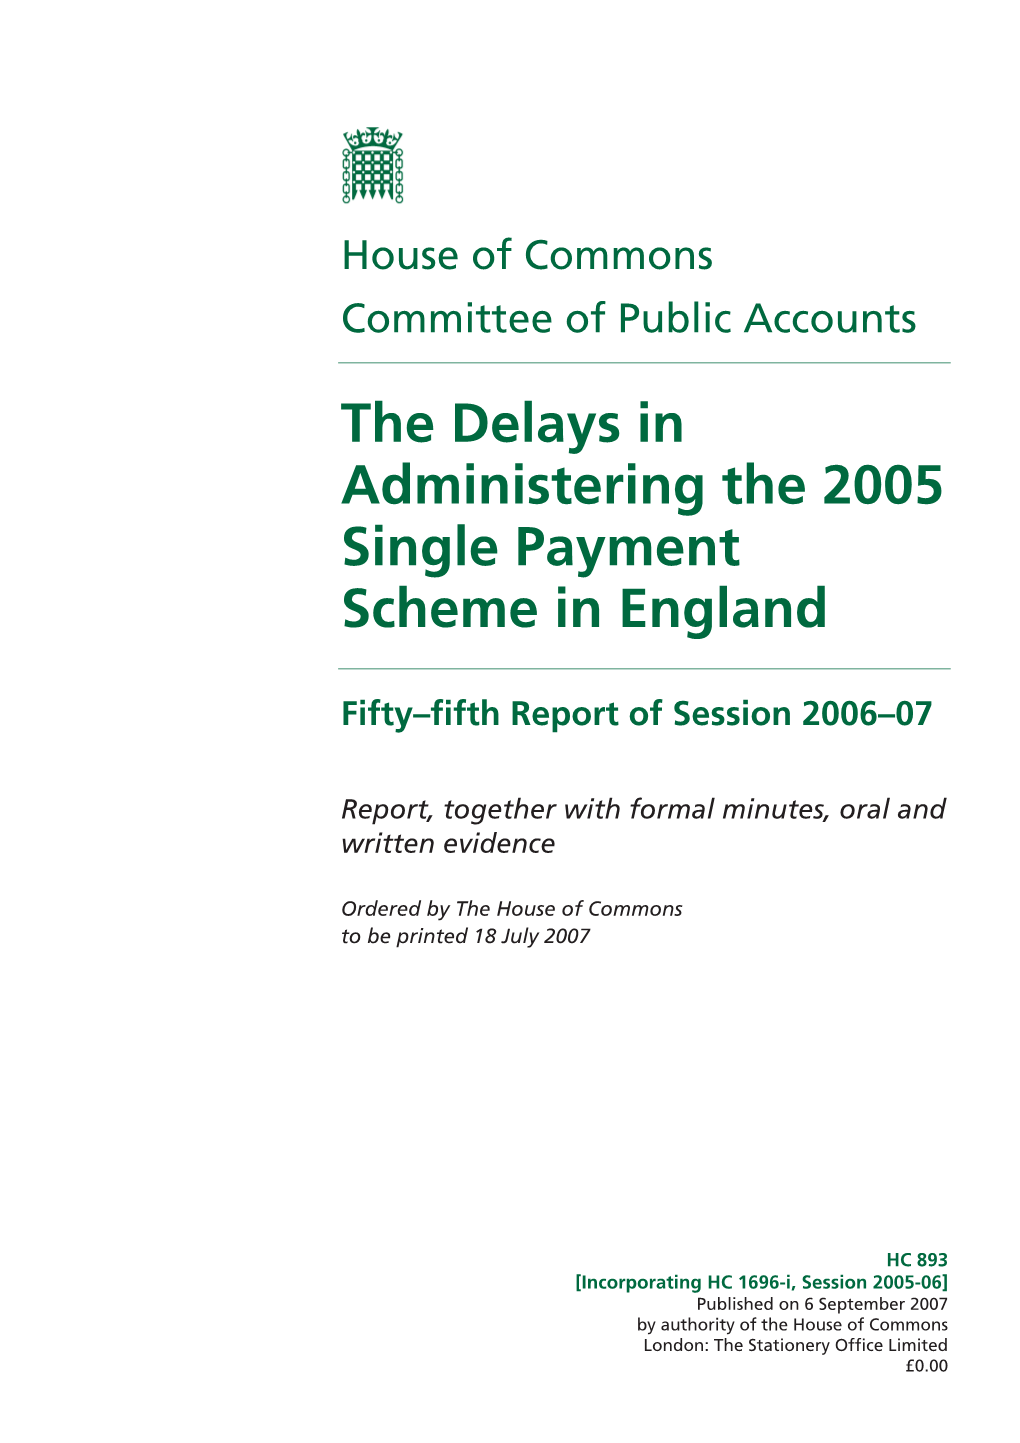 The Delays in Administering the 2005 Single Payment Scheme in England